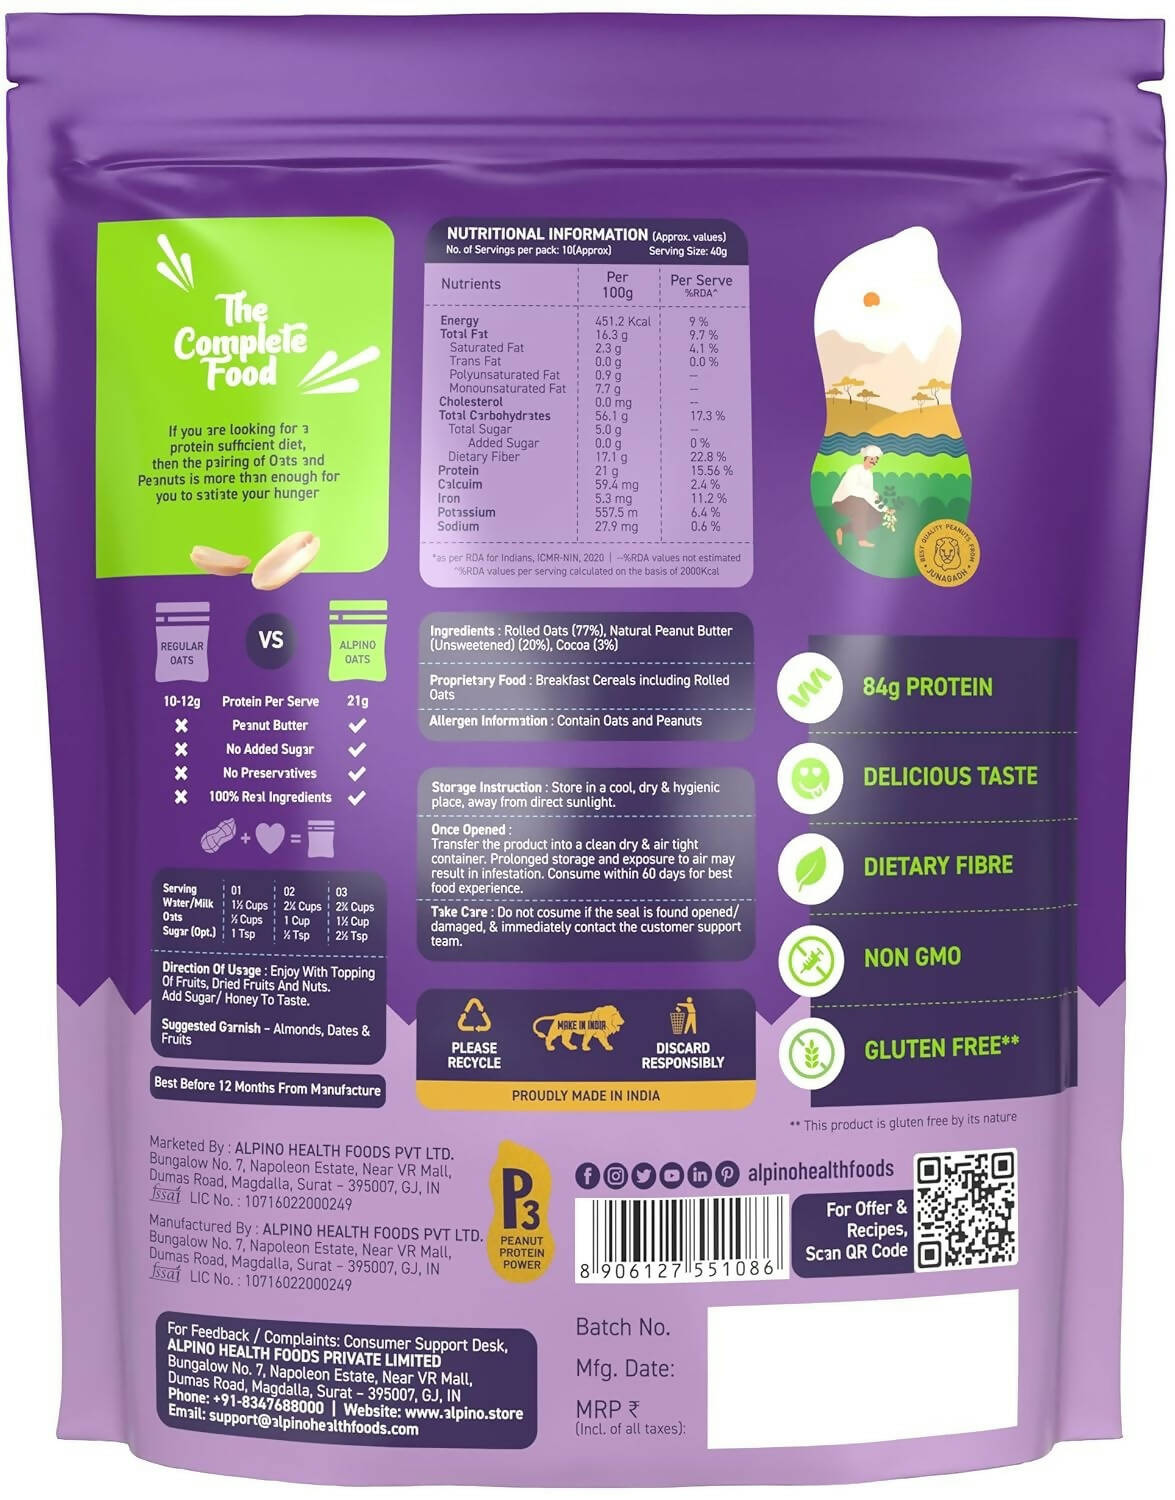 Alpino High Protein Super Rolled Oats Chocolate - Distacart